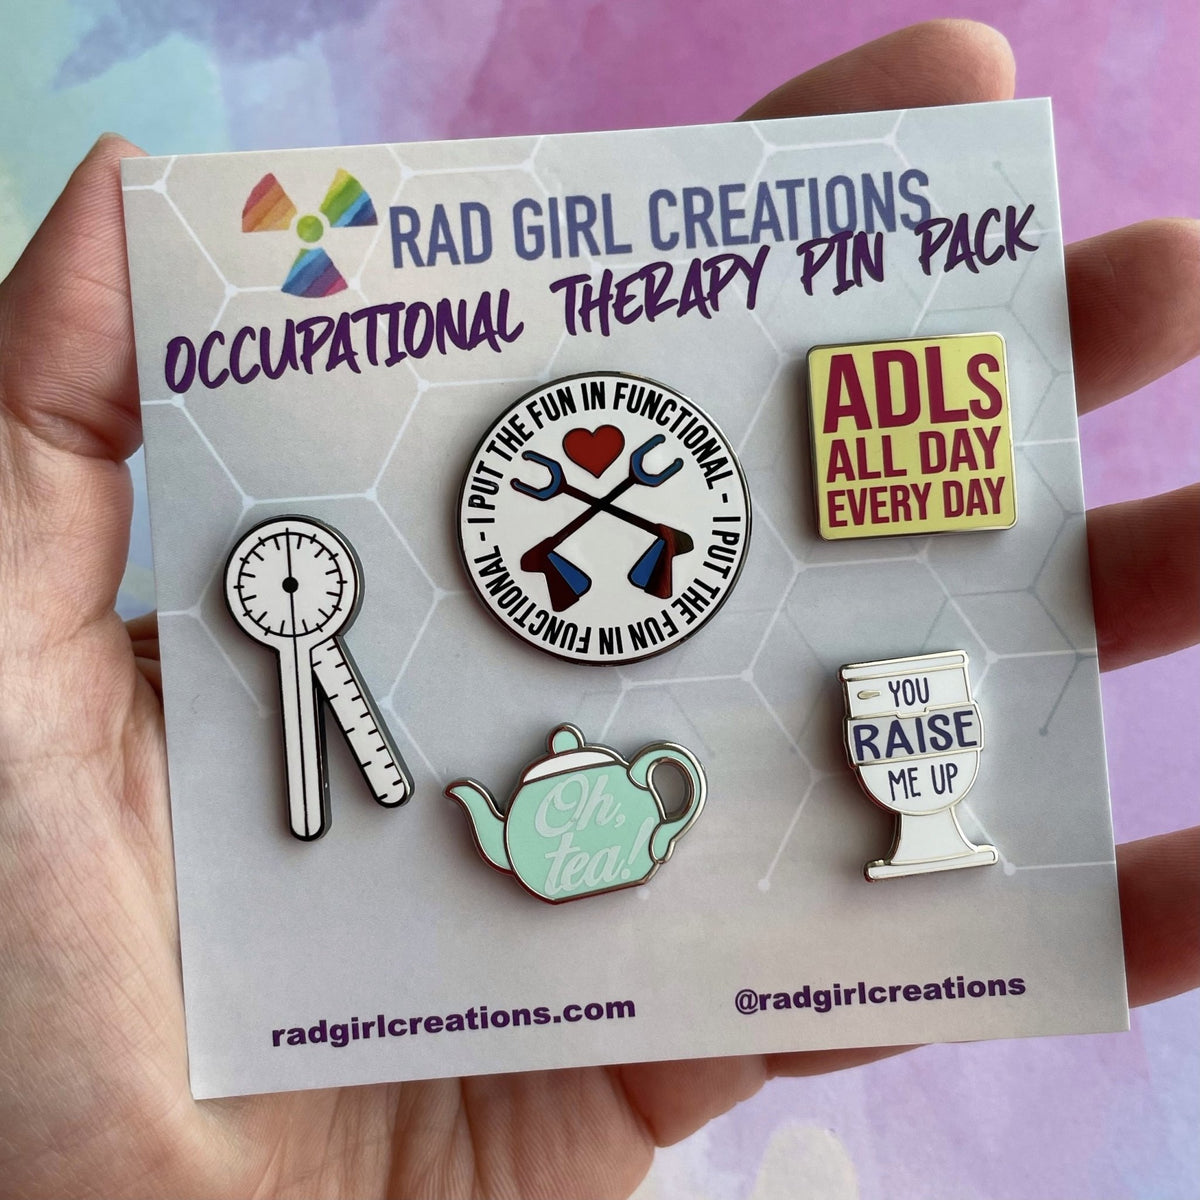 Occupational Therapy Pin Pack - Rad Girl Creations